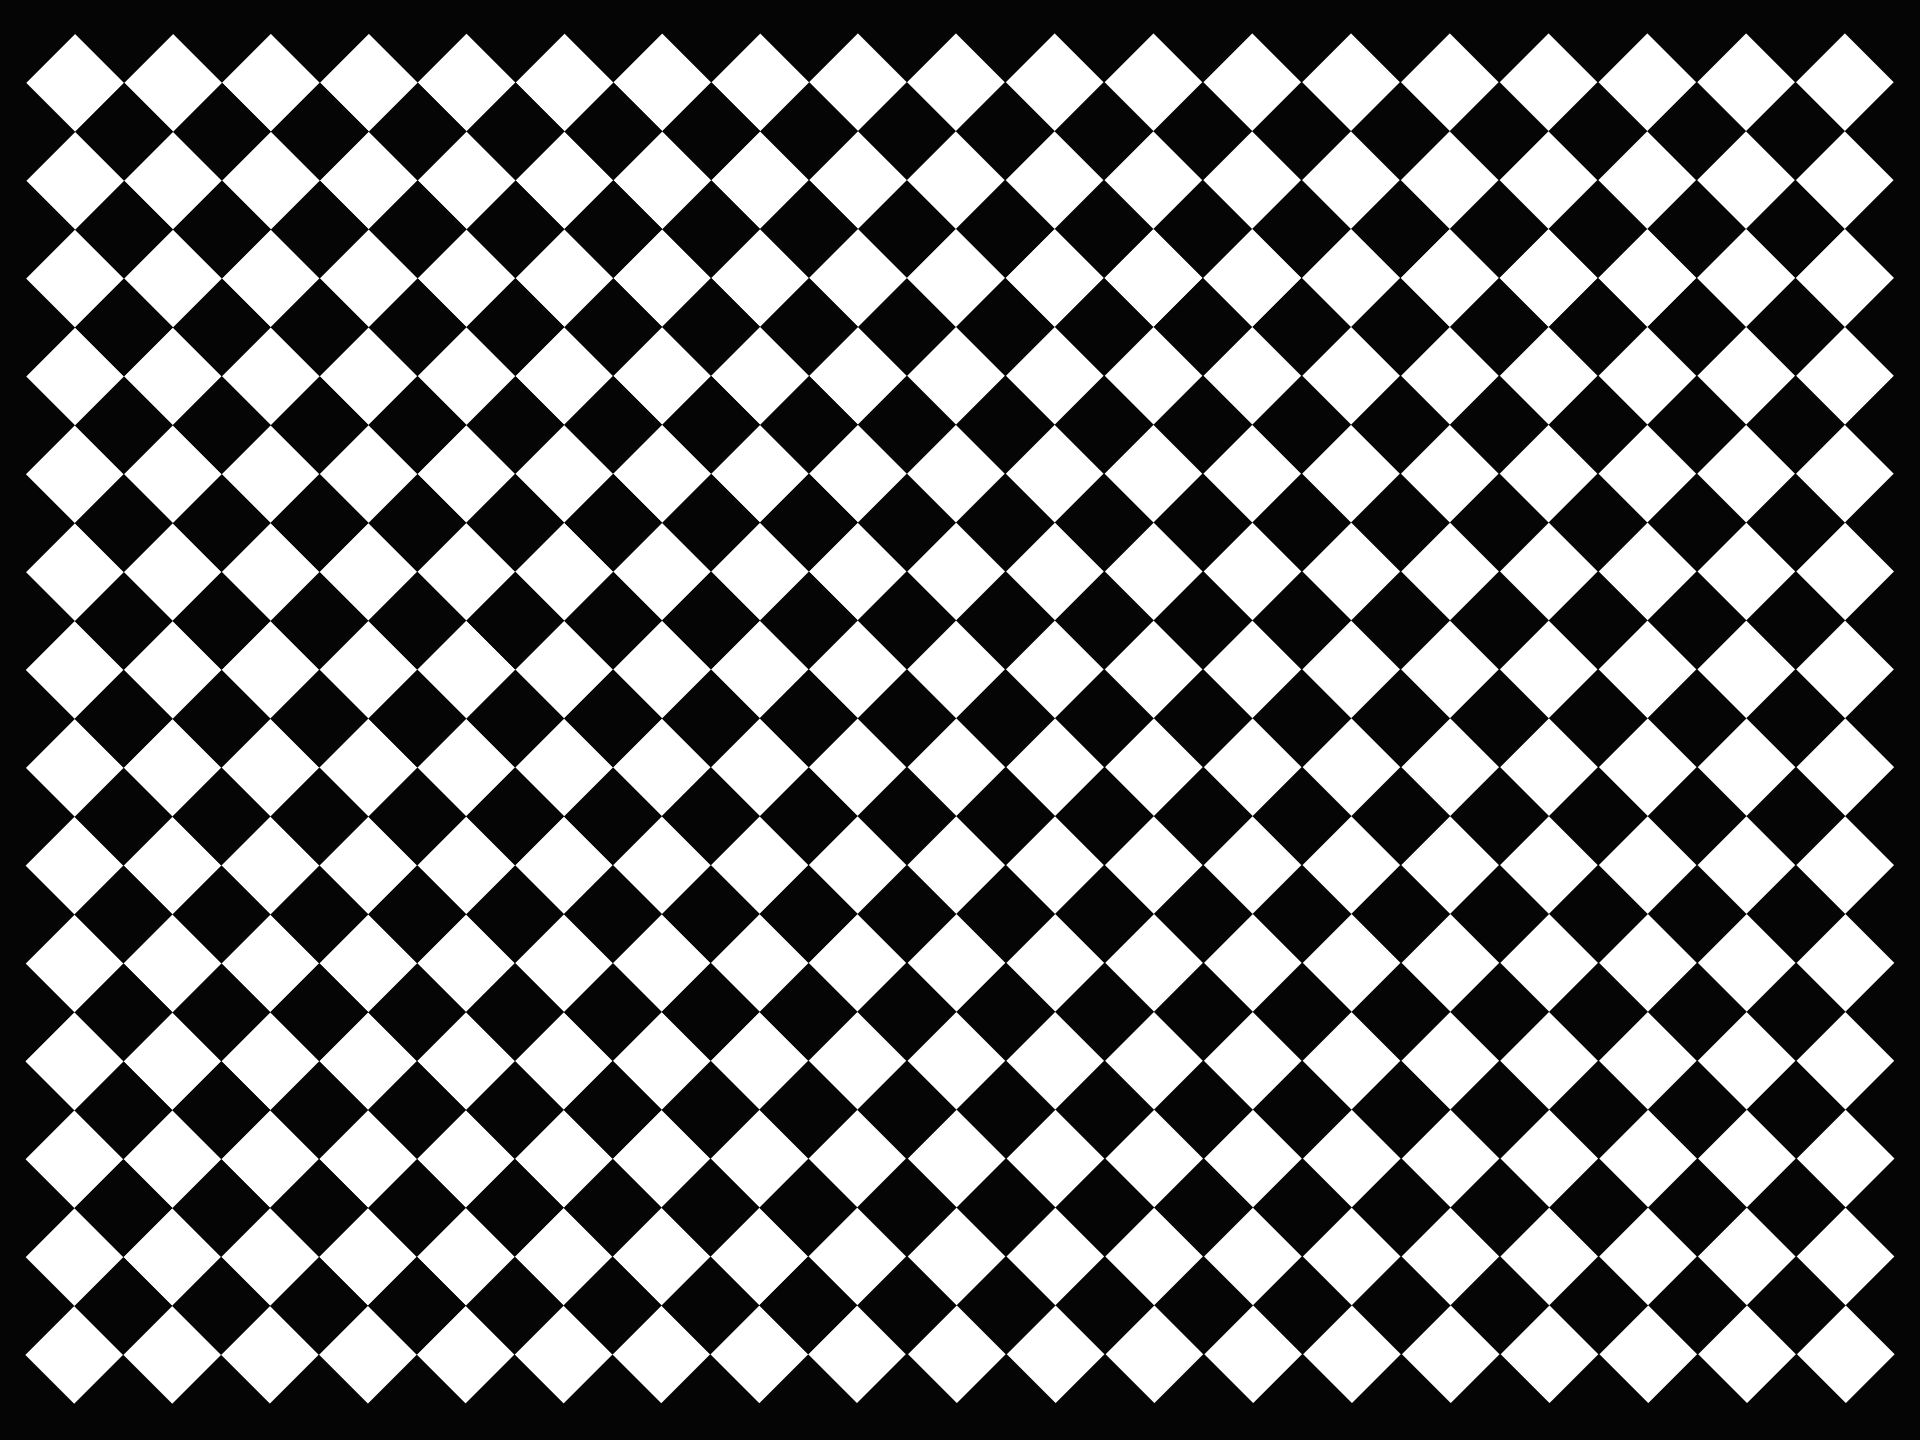 7 Best Images of Printable Checkerboard Game Free Printable Checkers